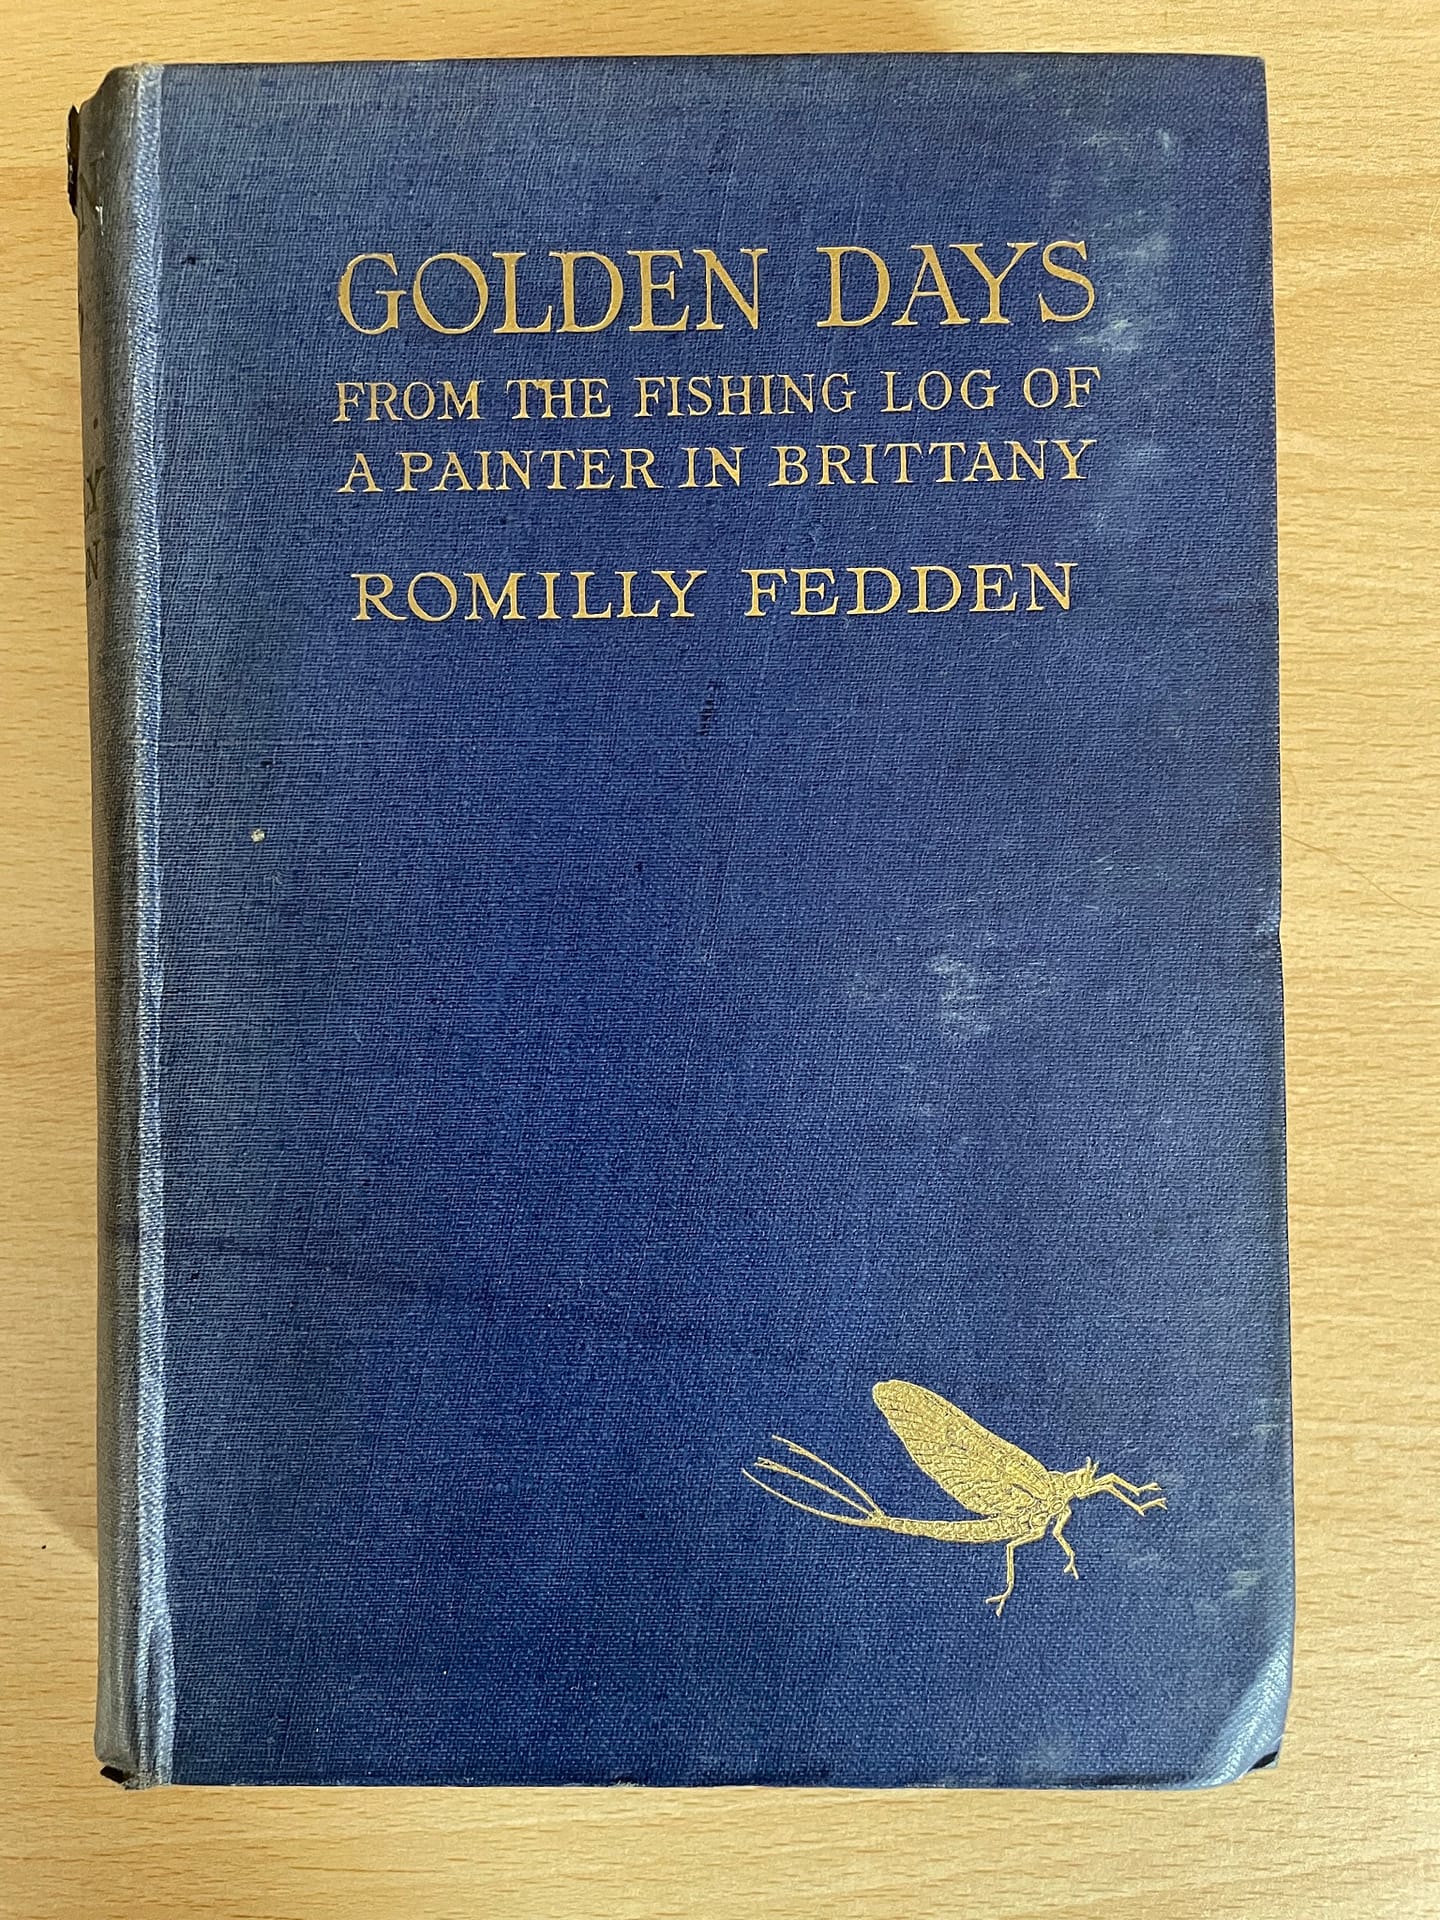 The Golden Days of Romilly Fedden